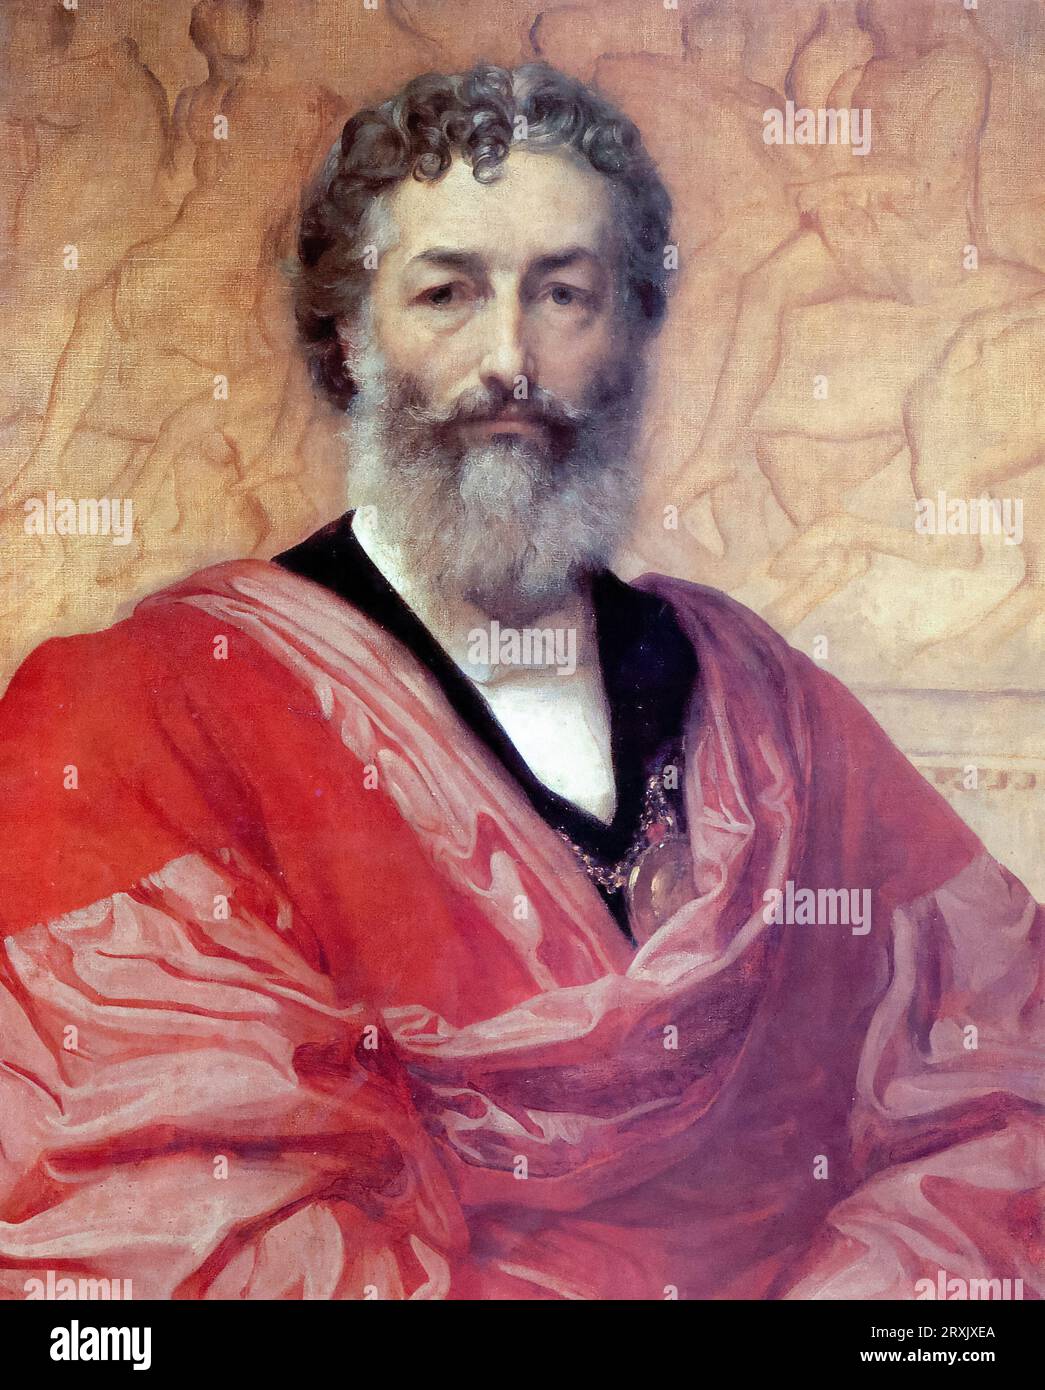 Frederic Leighton, i barone Leighton (1830-1896), Self Portrait painting of the British Victorian Painter, draftsman, and sculptor, oil on canvas, 1880 Foto Stock